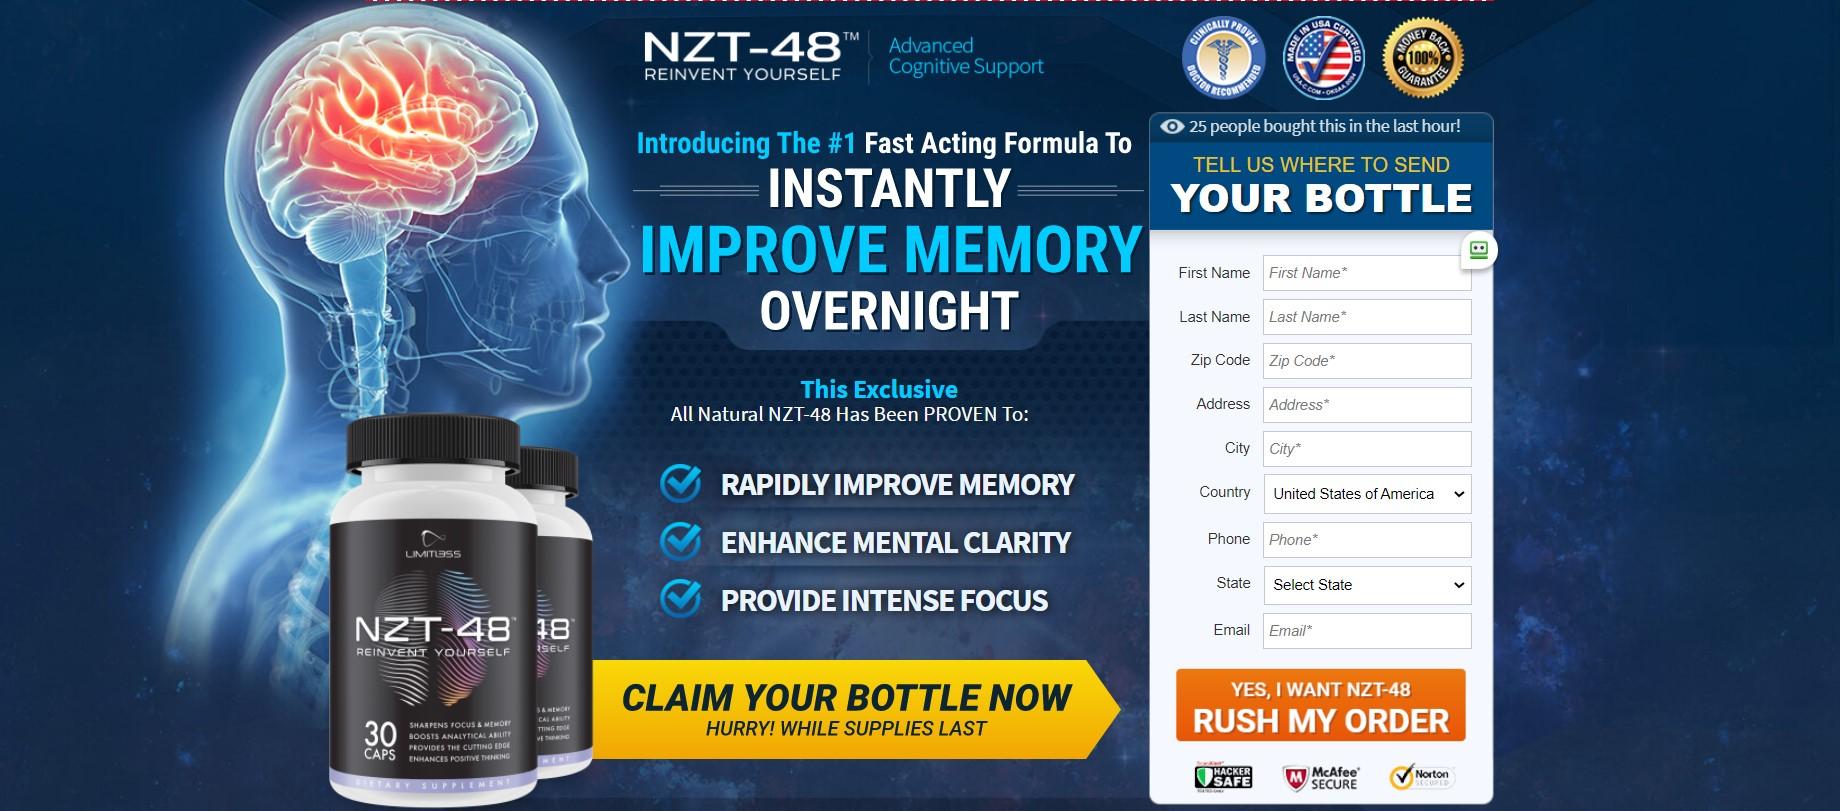 NZT-48 #1 To Effortlessly Improve Memory Brain - NZT-48 Limitless Pill is a...